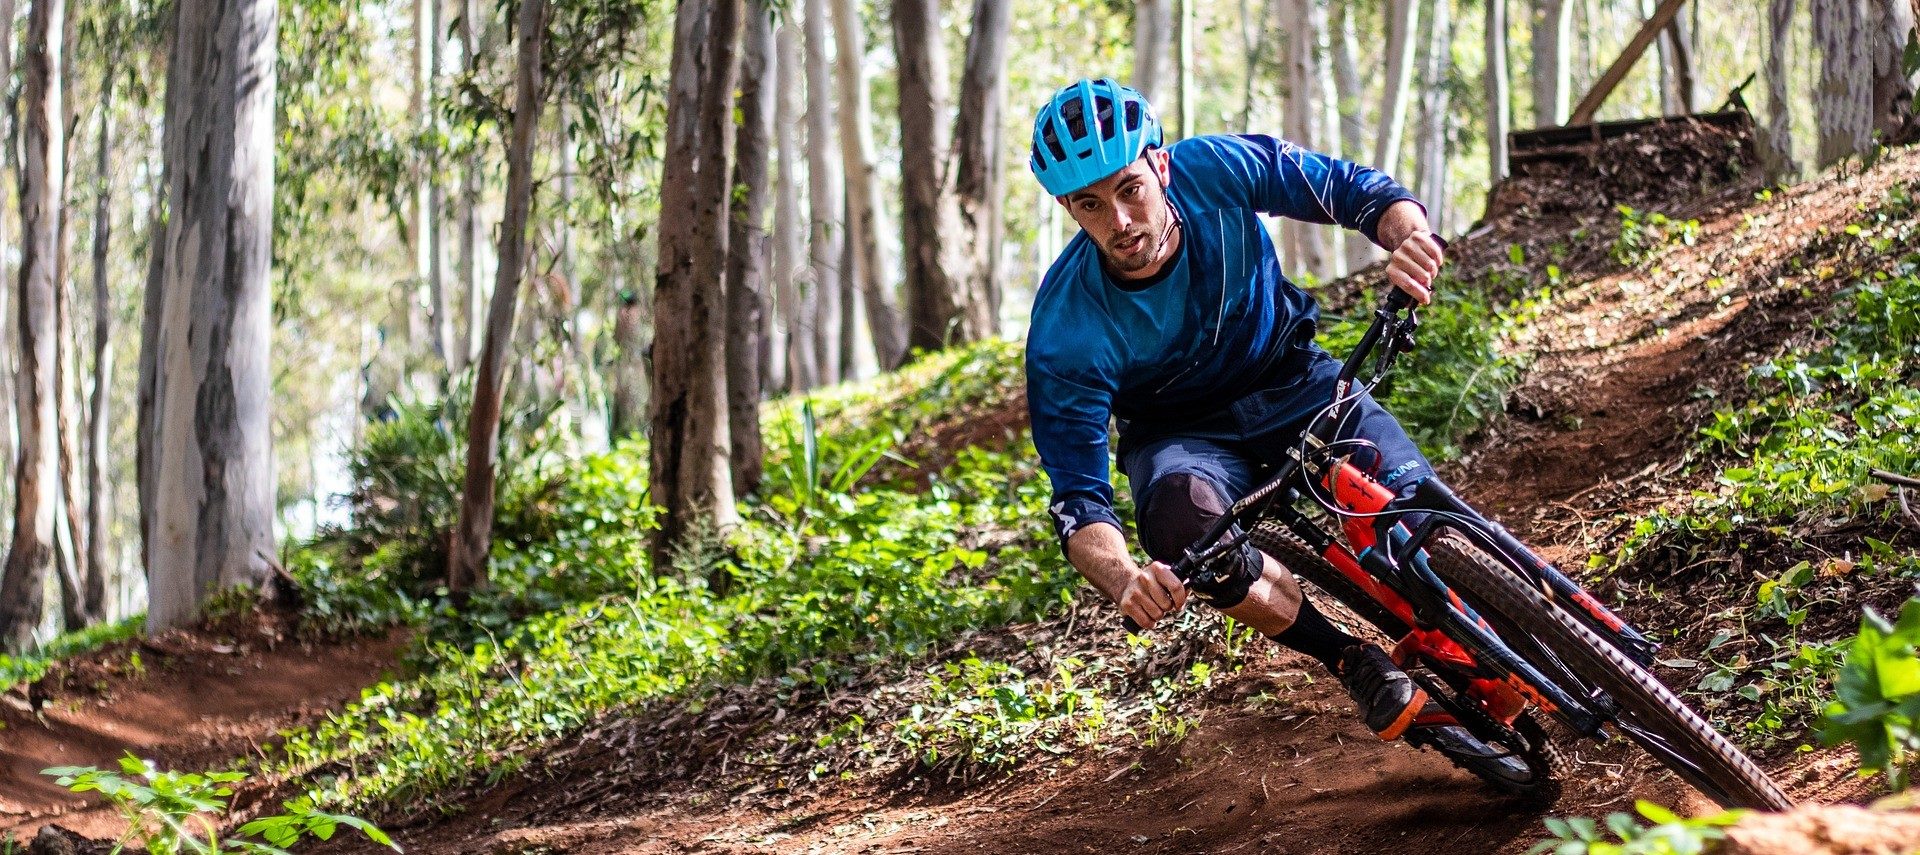 A mountain biker in a blue shirt and helmet racing down a trail in the woods